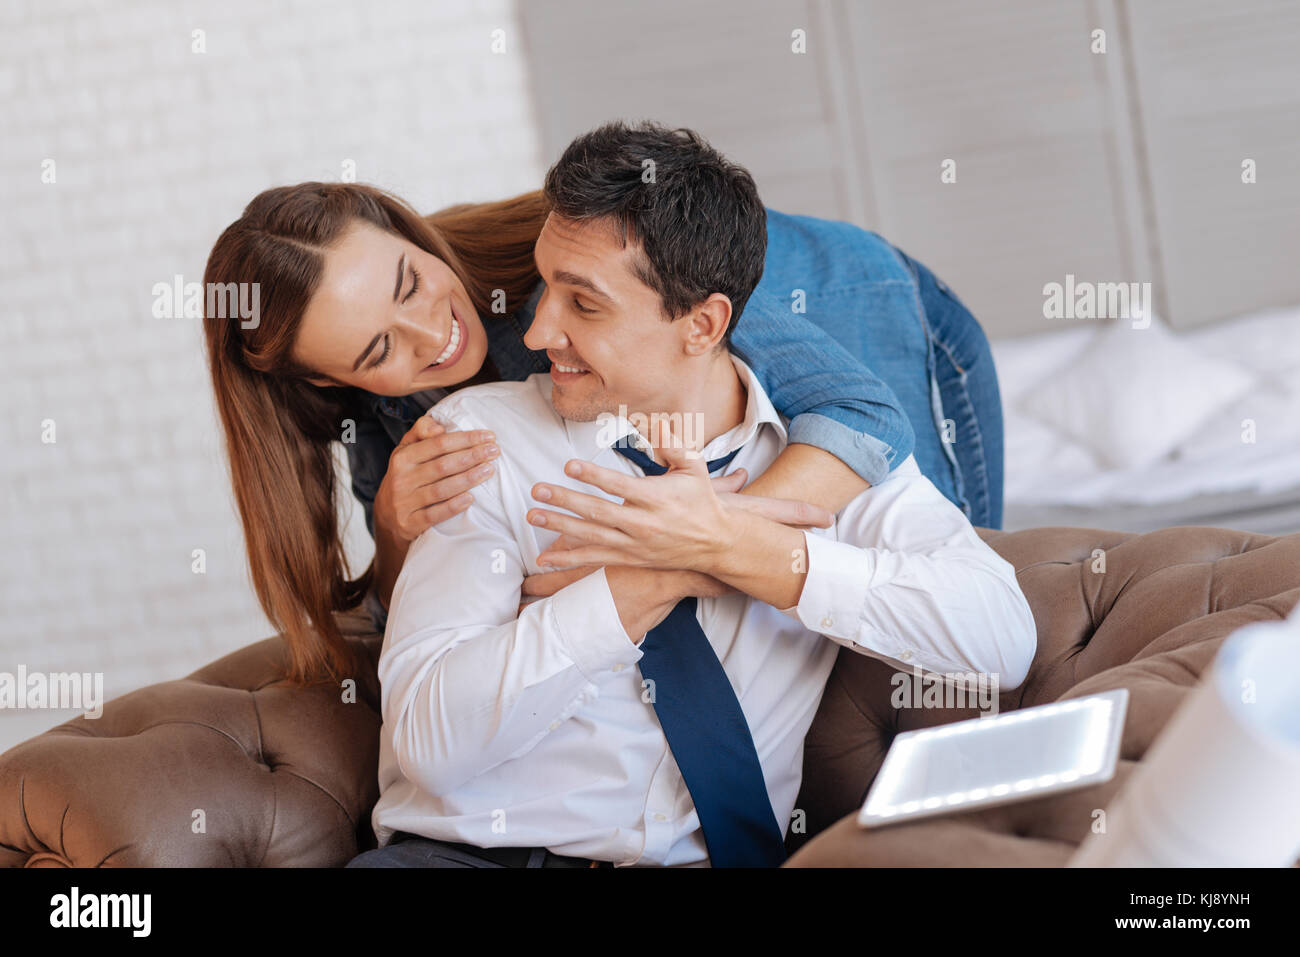 Loving wife smiling to her kind husband while hugging him Stock Photo